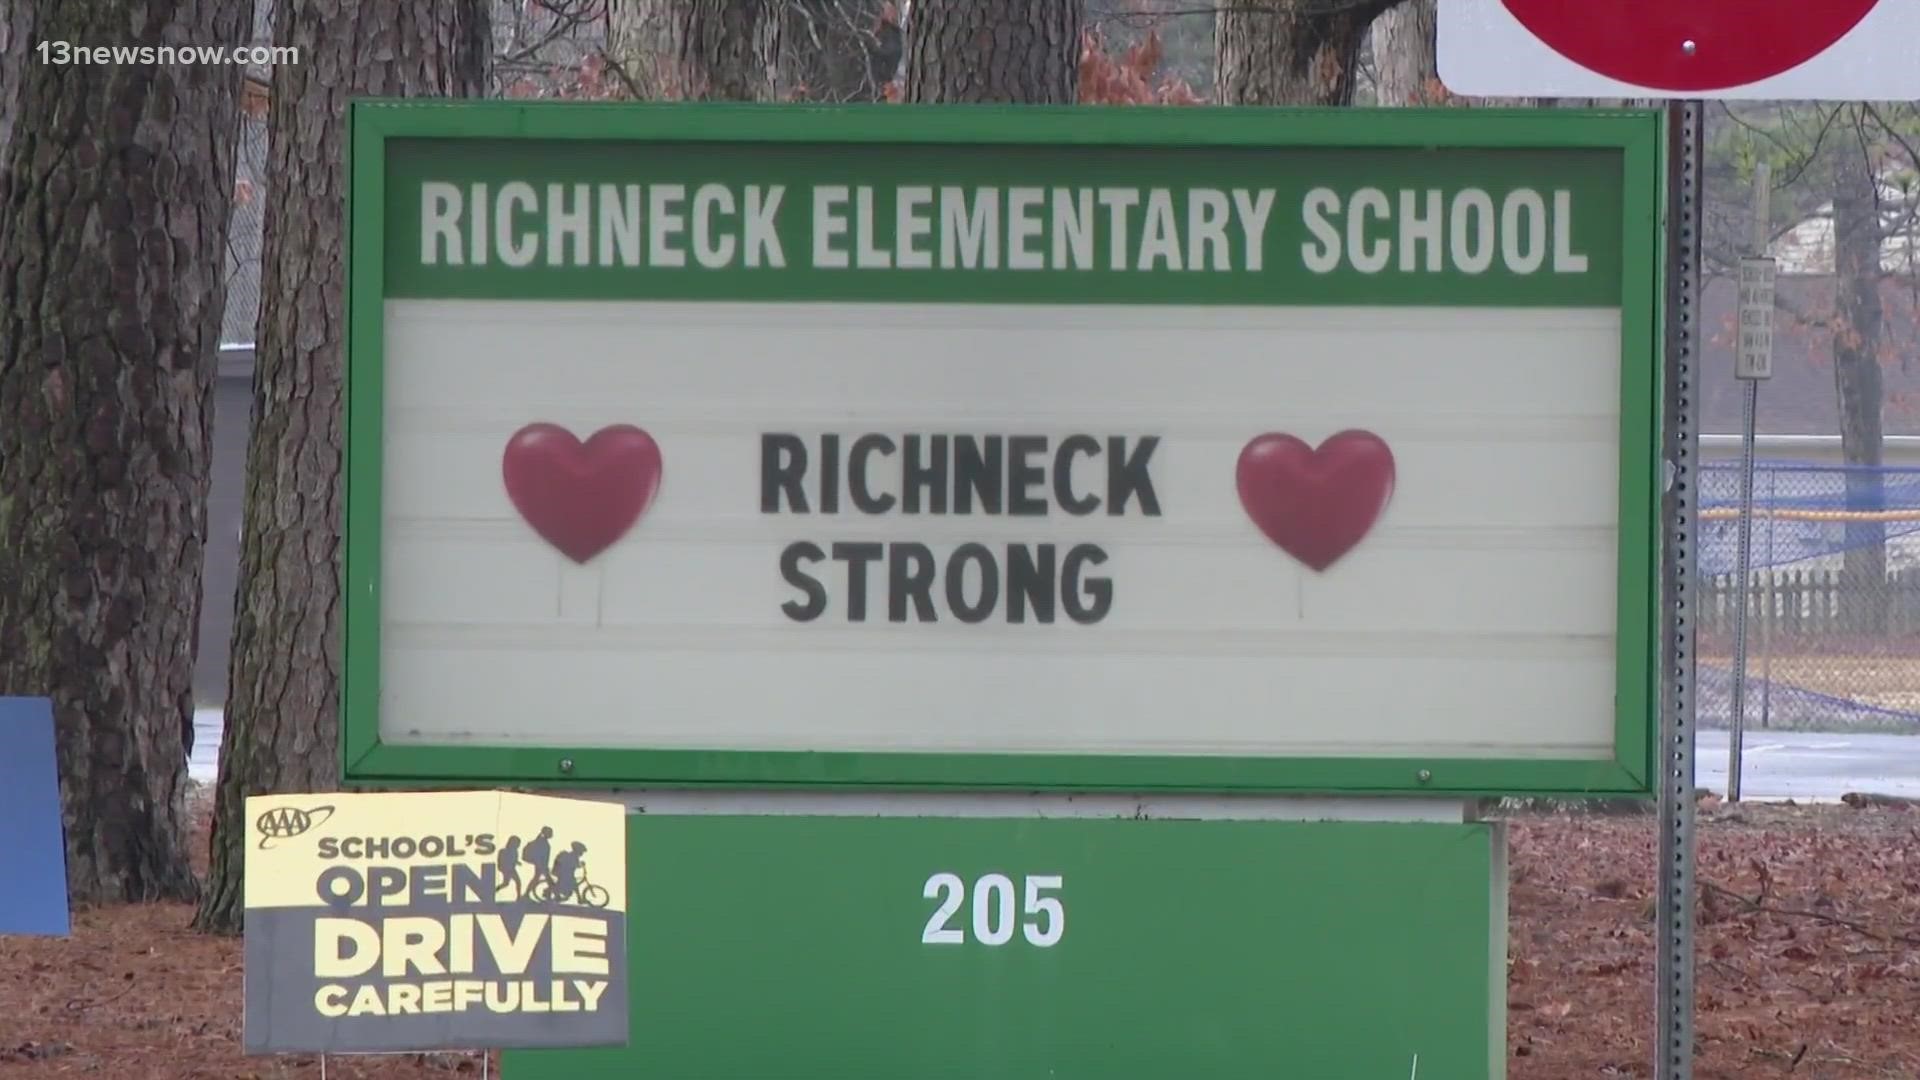 The recent shooting at Richneck Elementary School sparked a wave of discussions regarding concerns within the Newport News Public Schools division.